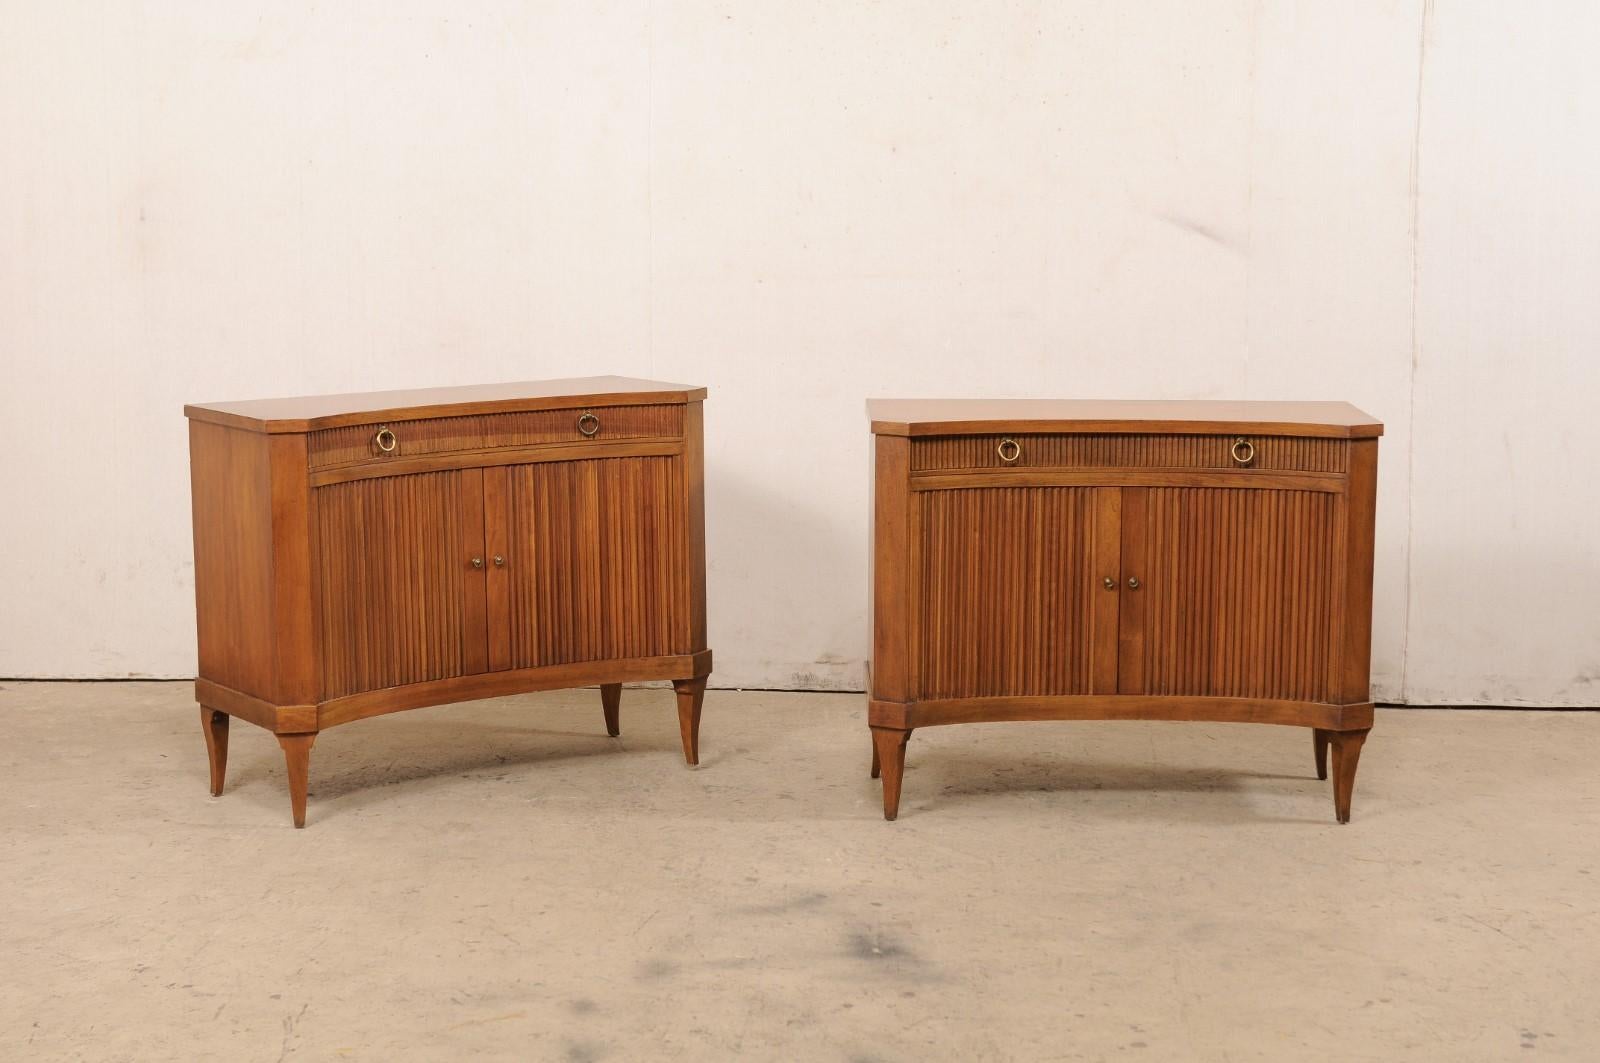 A pair of curved-front wooden chests, with single drawer and tambour doors, from the mid 20th century. These vintage chests from American furniture makers, 